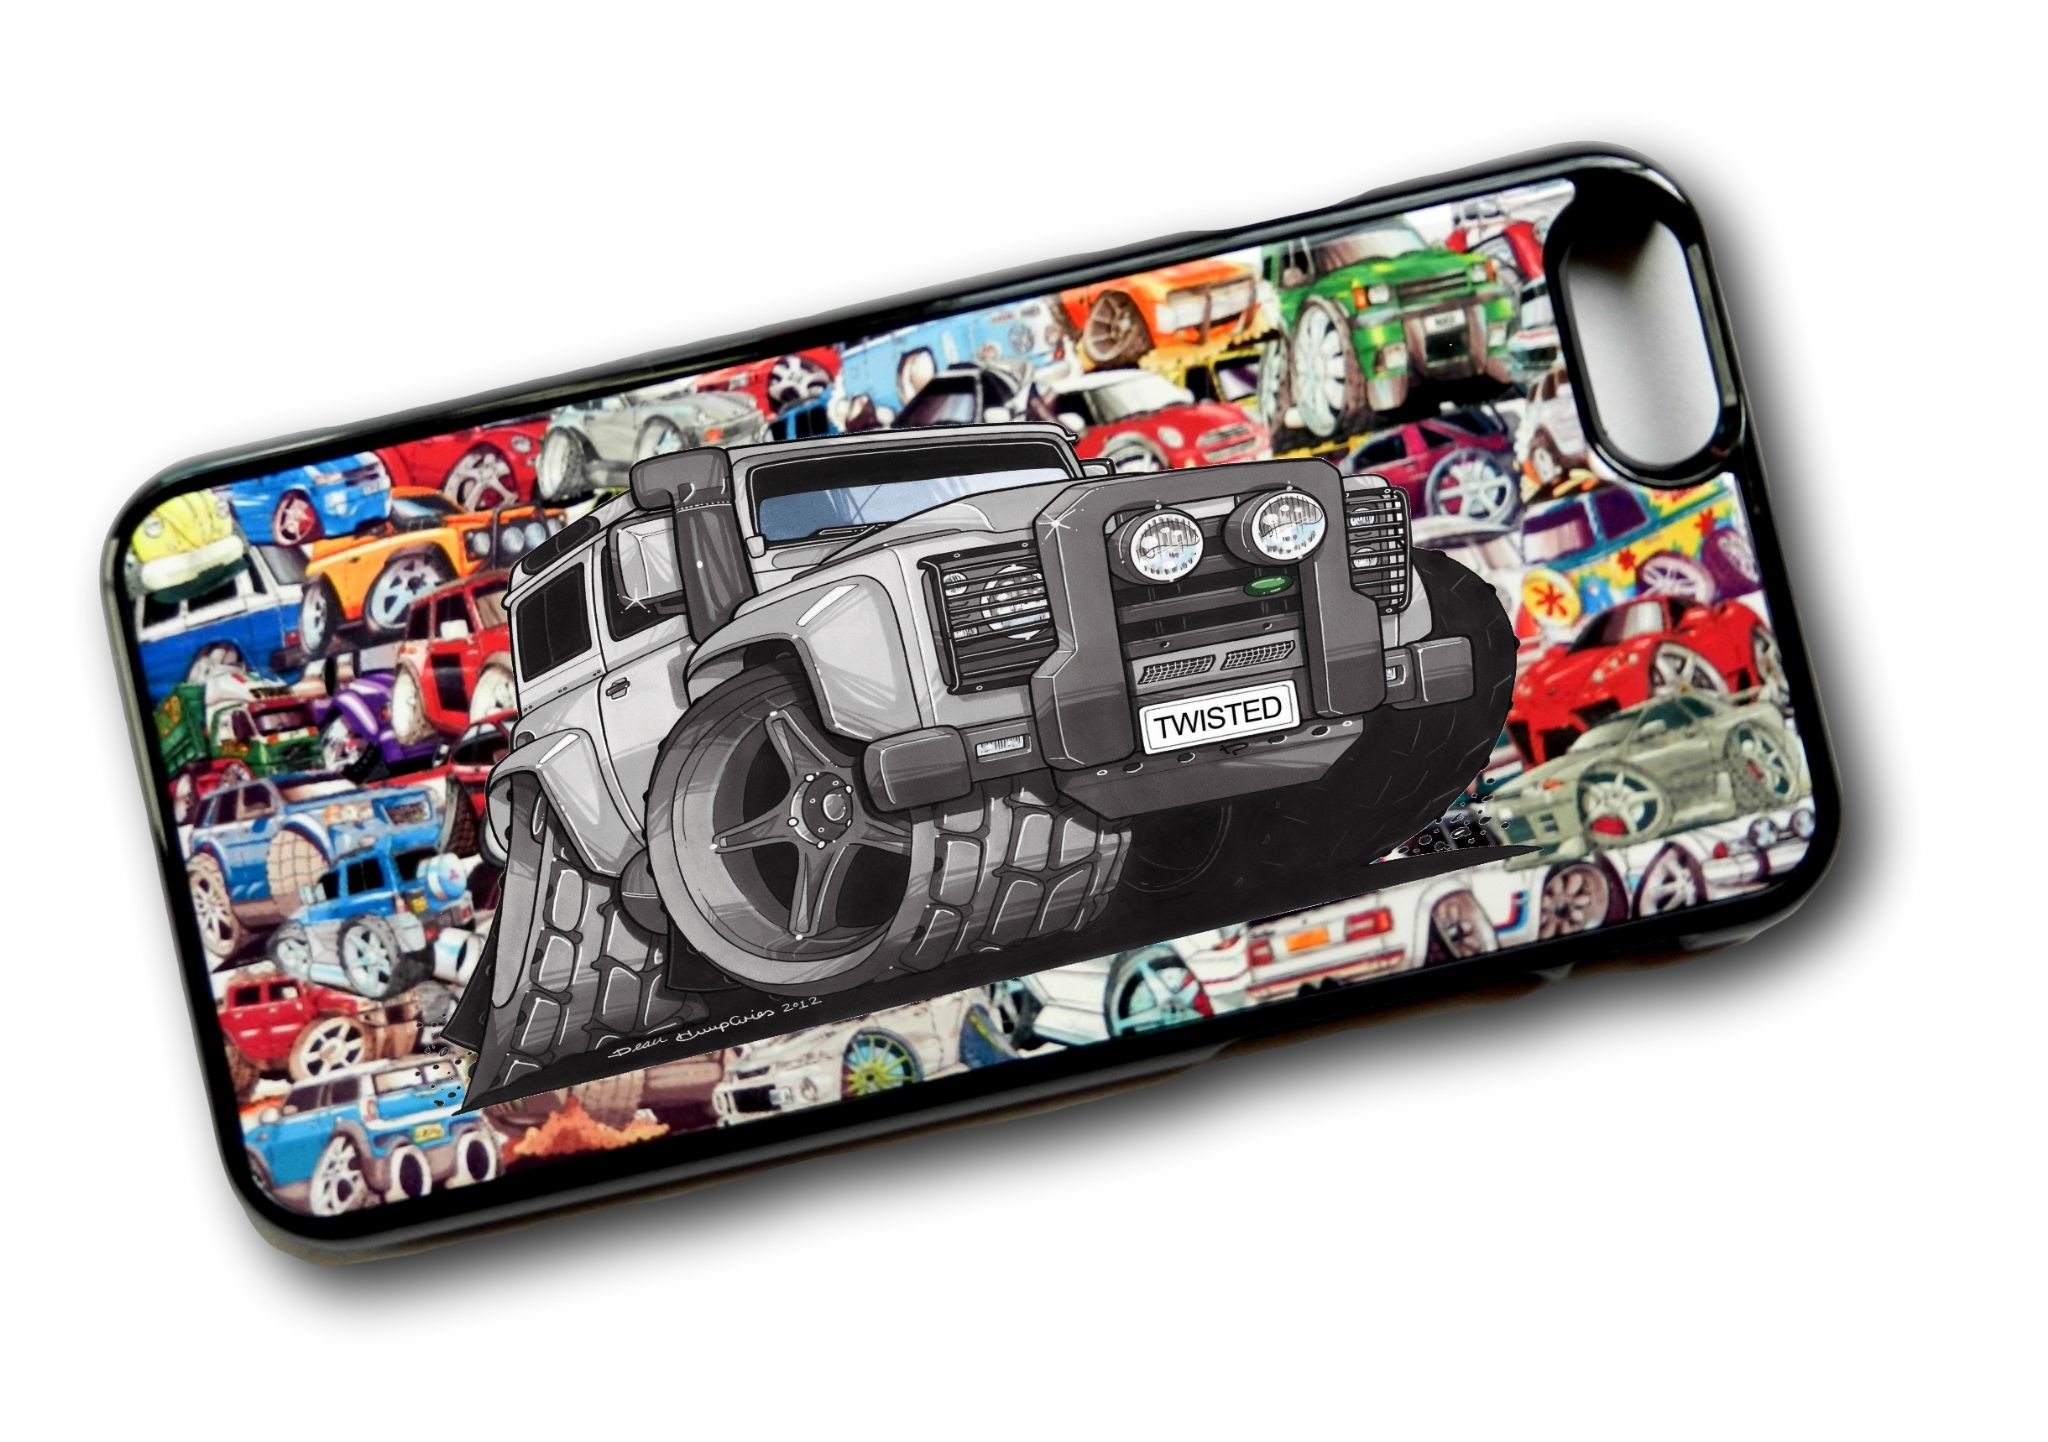 2048x1442 Koolart Stickerbomb Style Design For Land Rover Defender Twisted Hard Case  Cover Fits Apple Iphone 6 6s